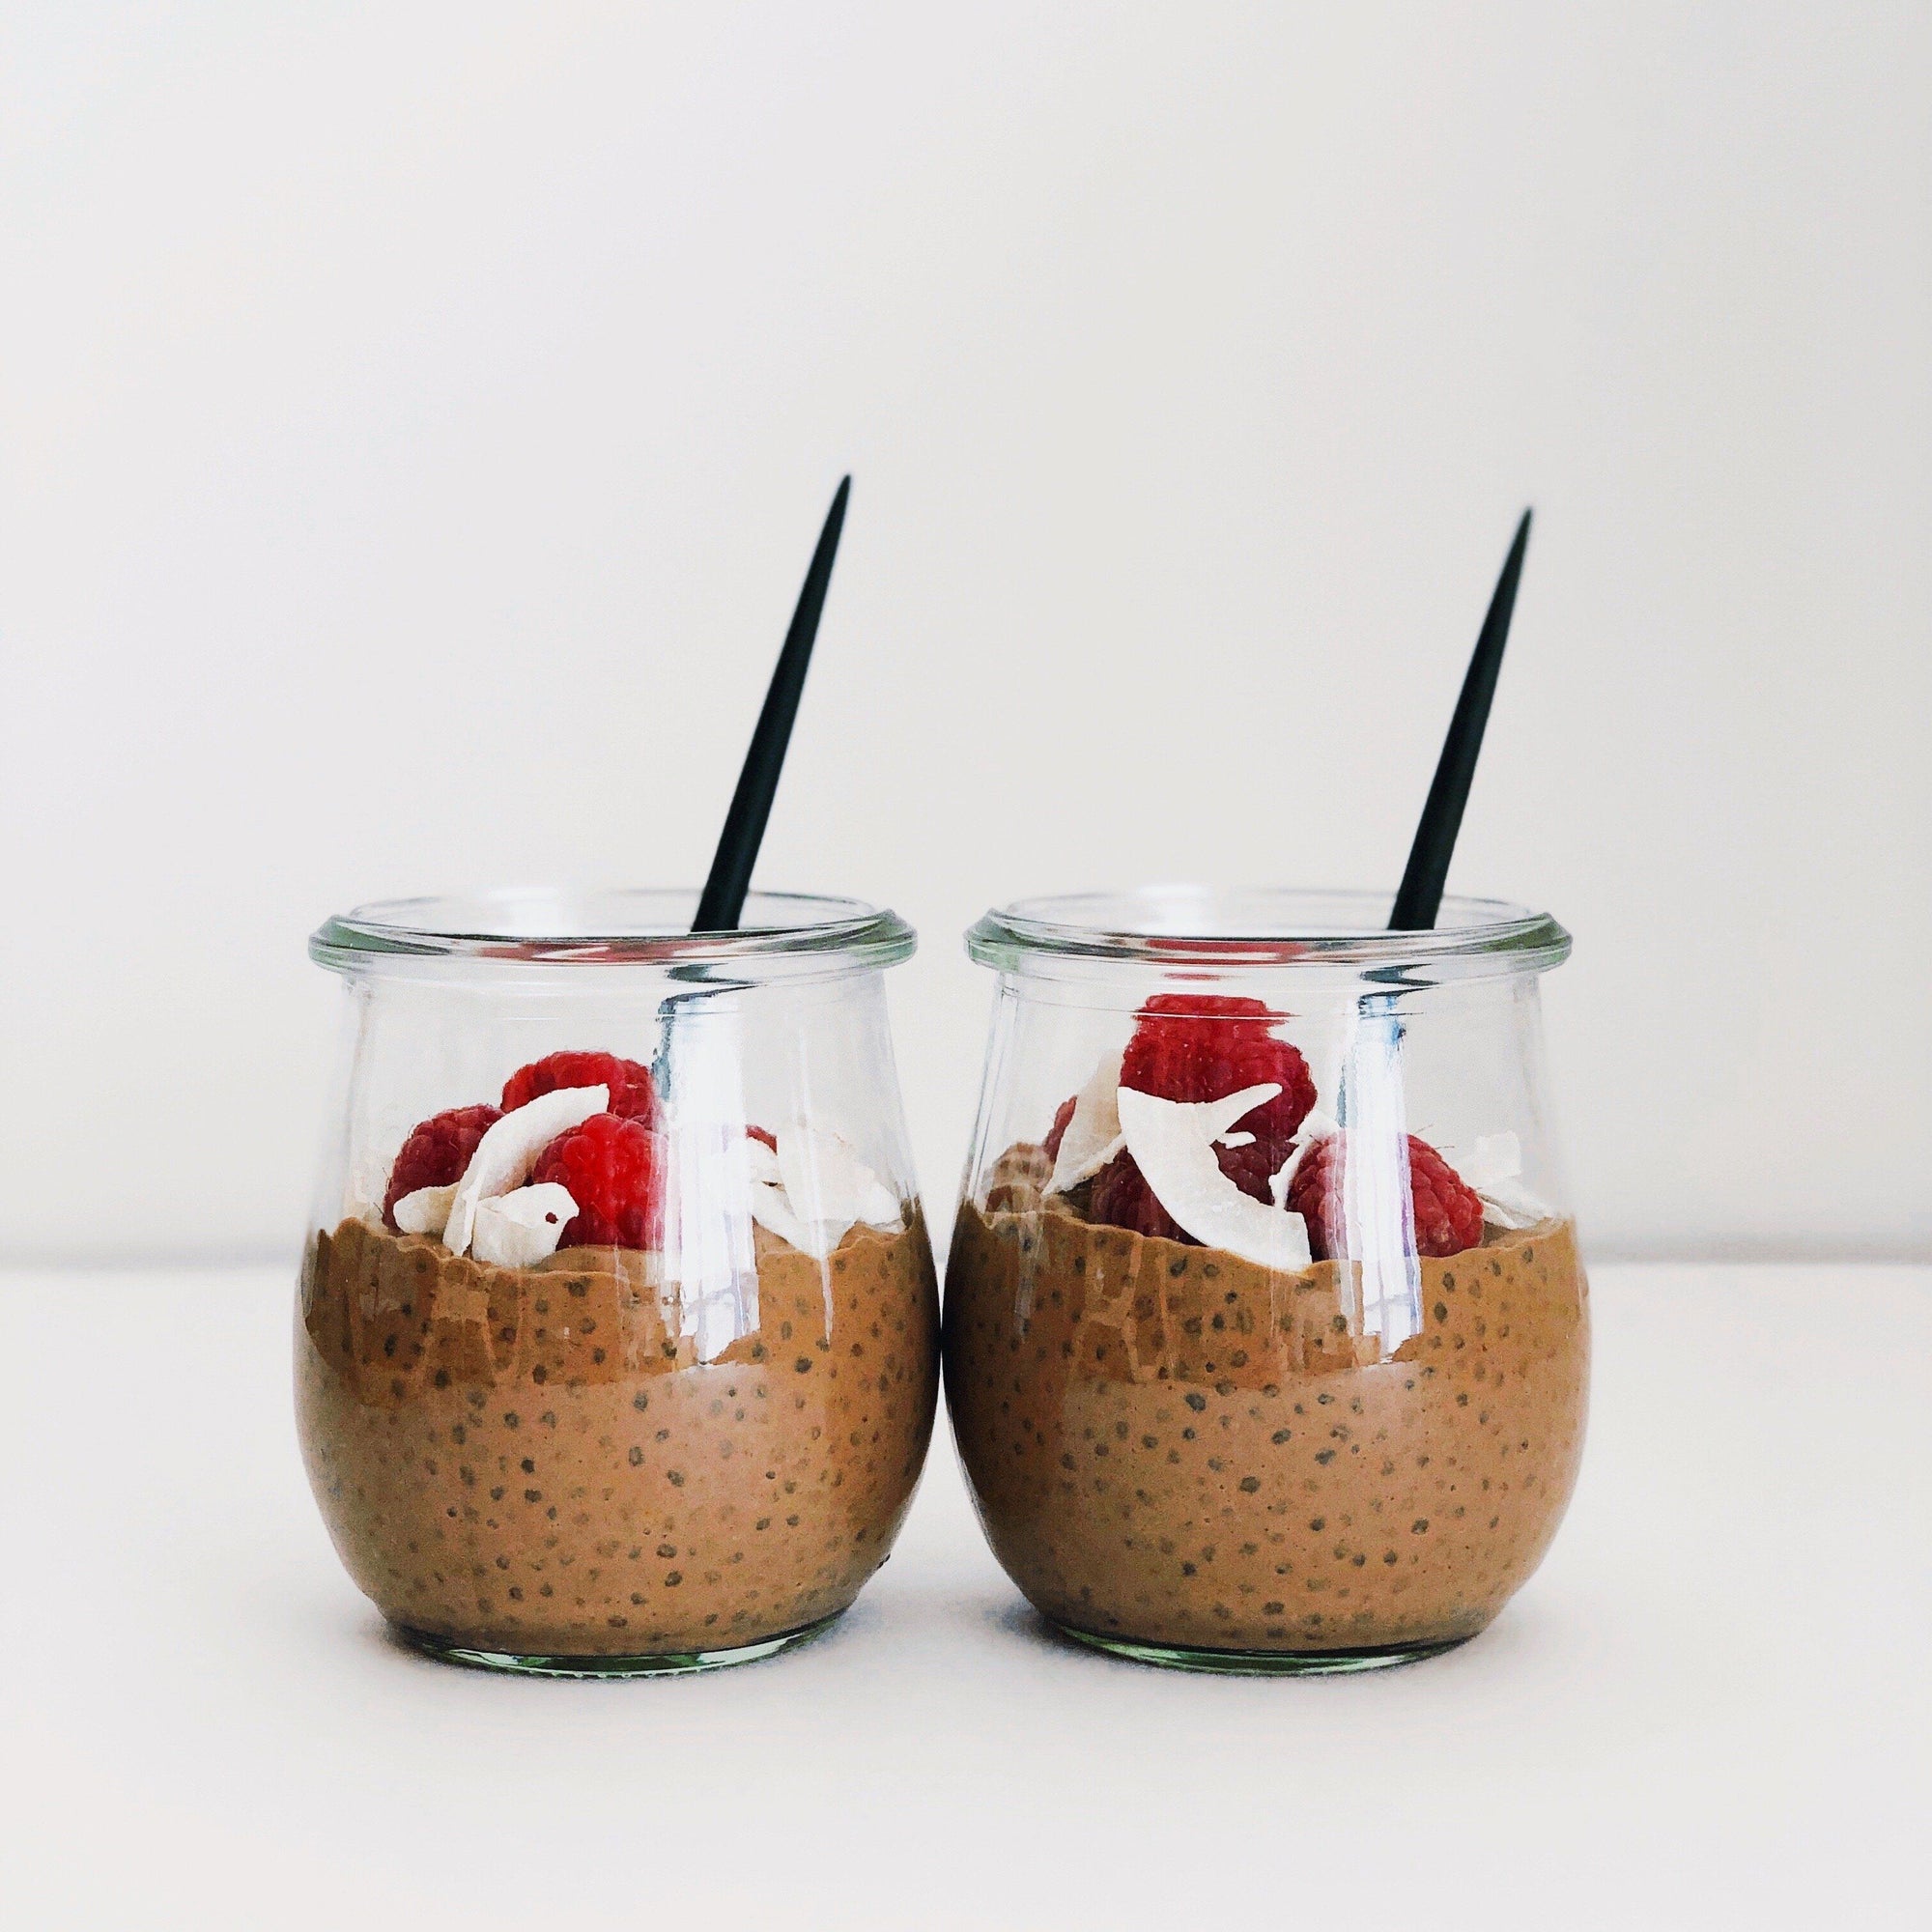 Cacao superfood latte and chia pudding recipes using JOYÀ cacao elixir on the blog at joya.ca